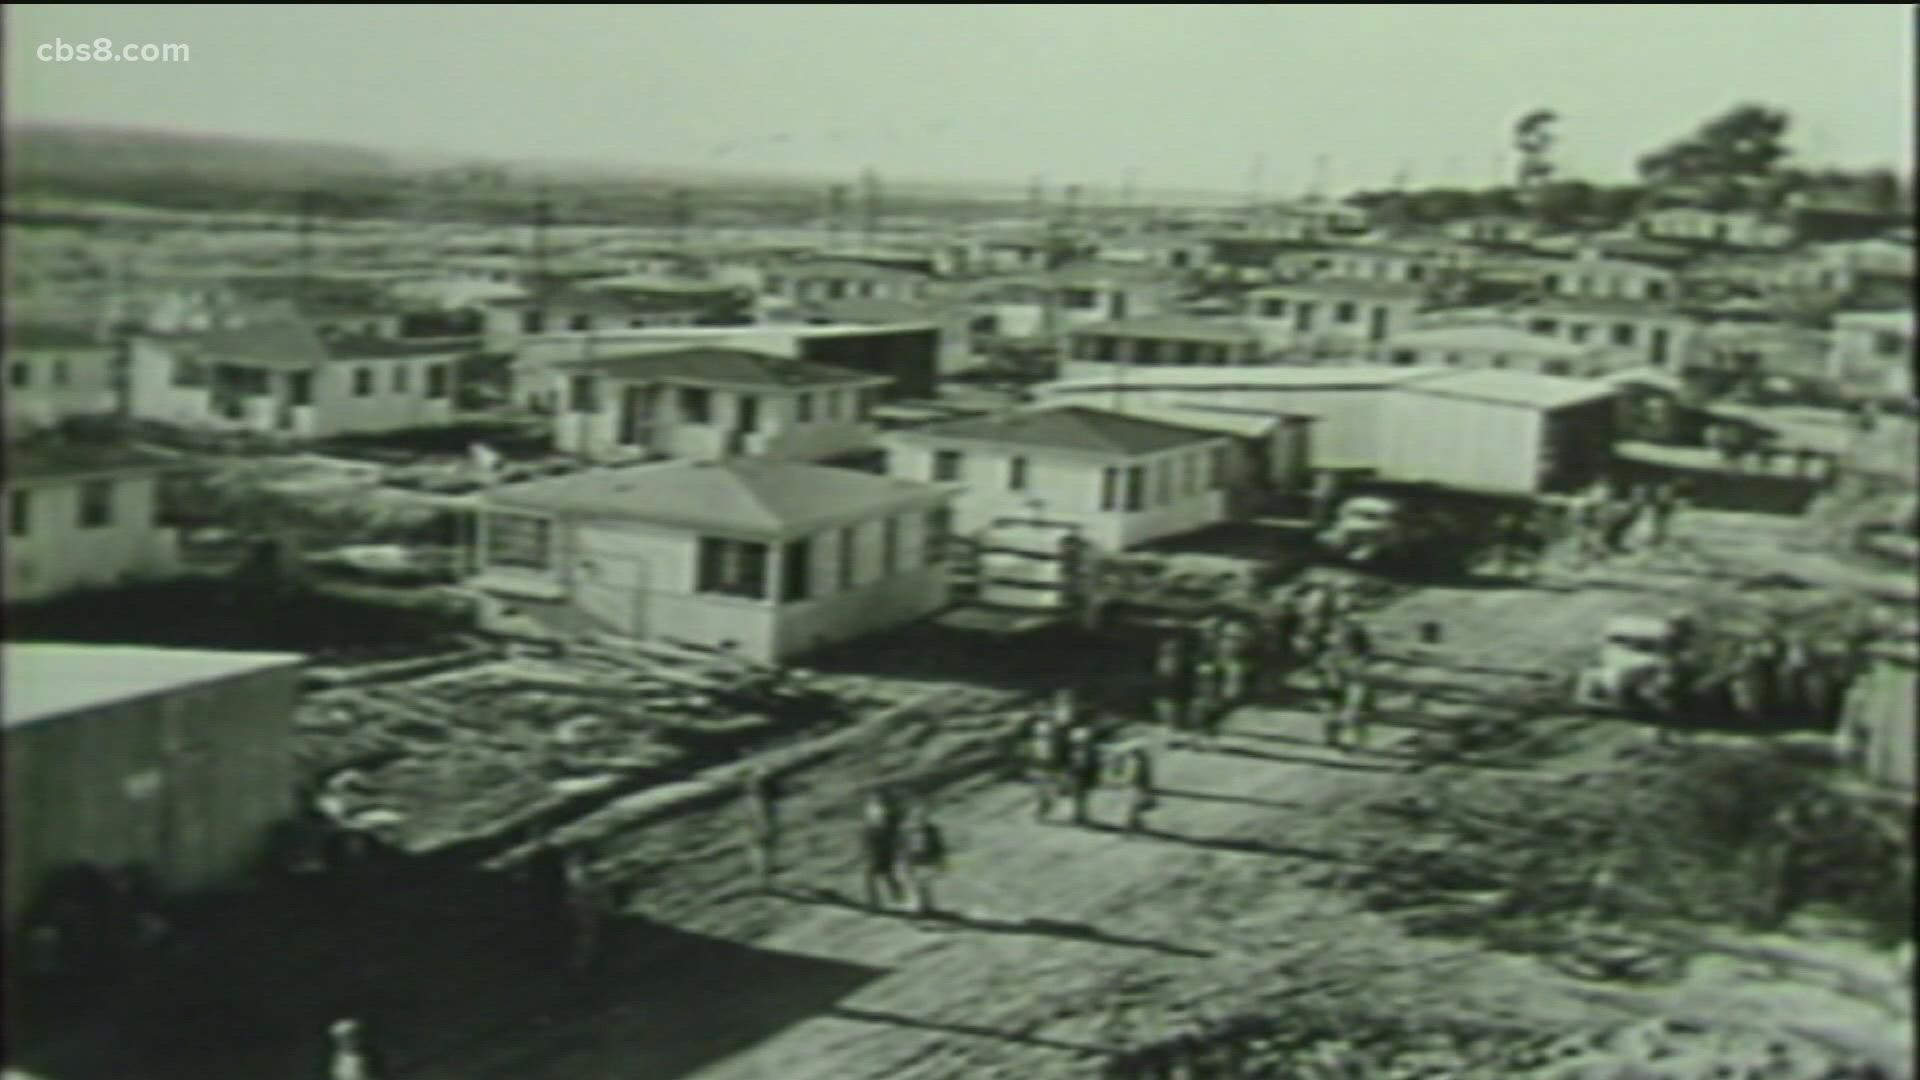 News 8 looks into the history of Linda Vista from Skateworld to the University of San Diego and how homes were built in the 1940's to house WWII defense workers.